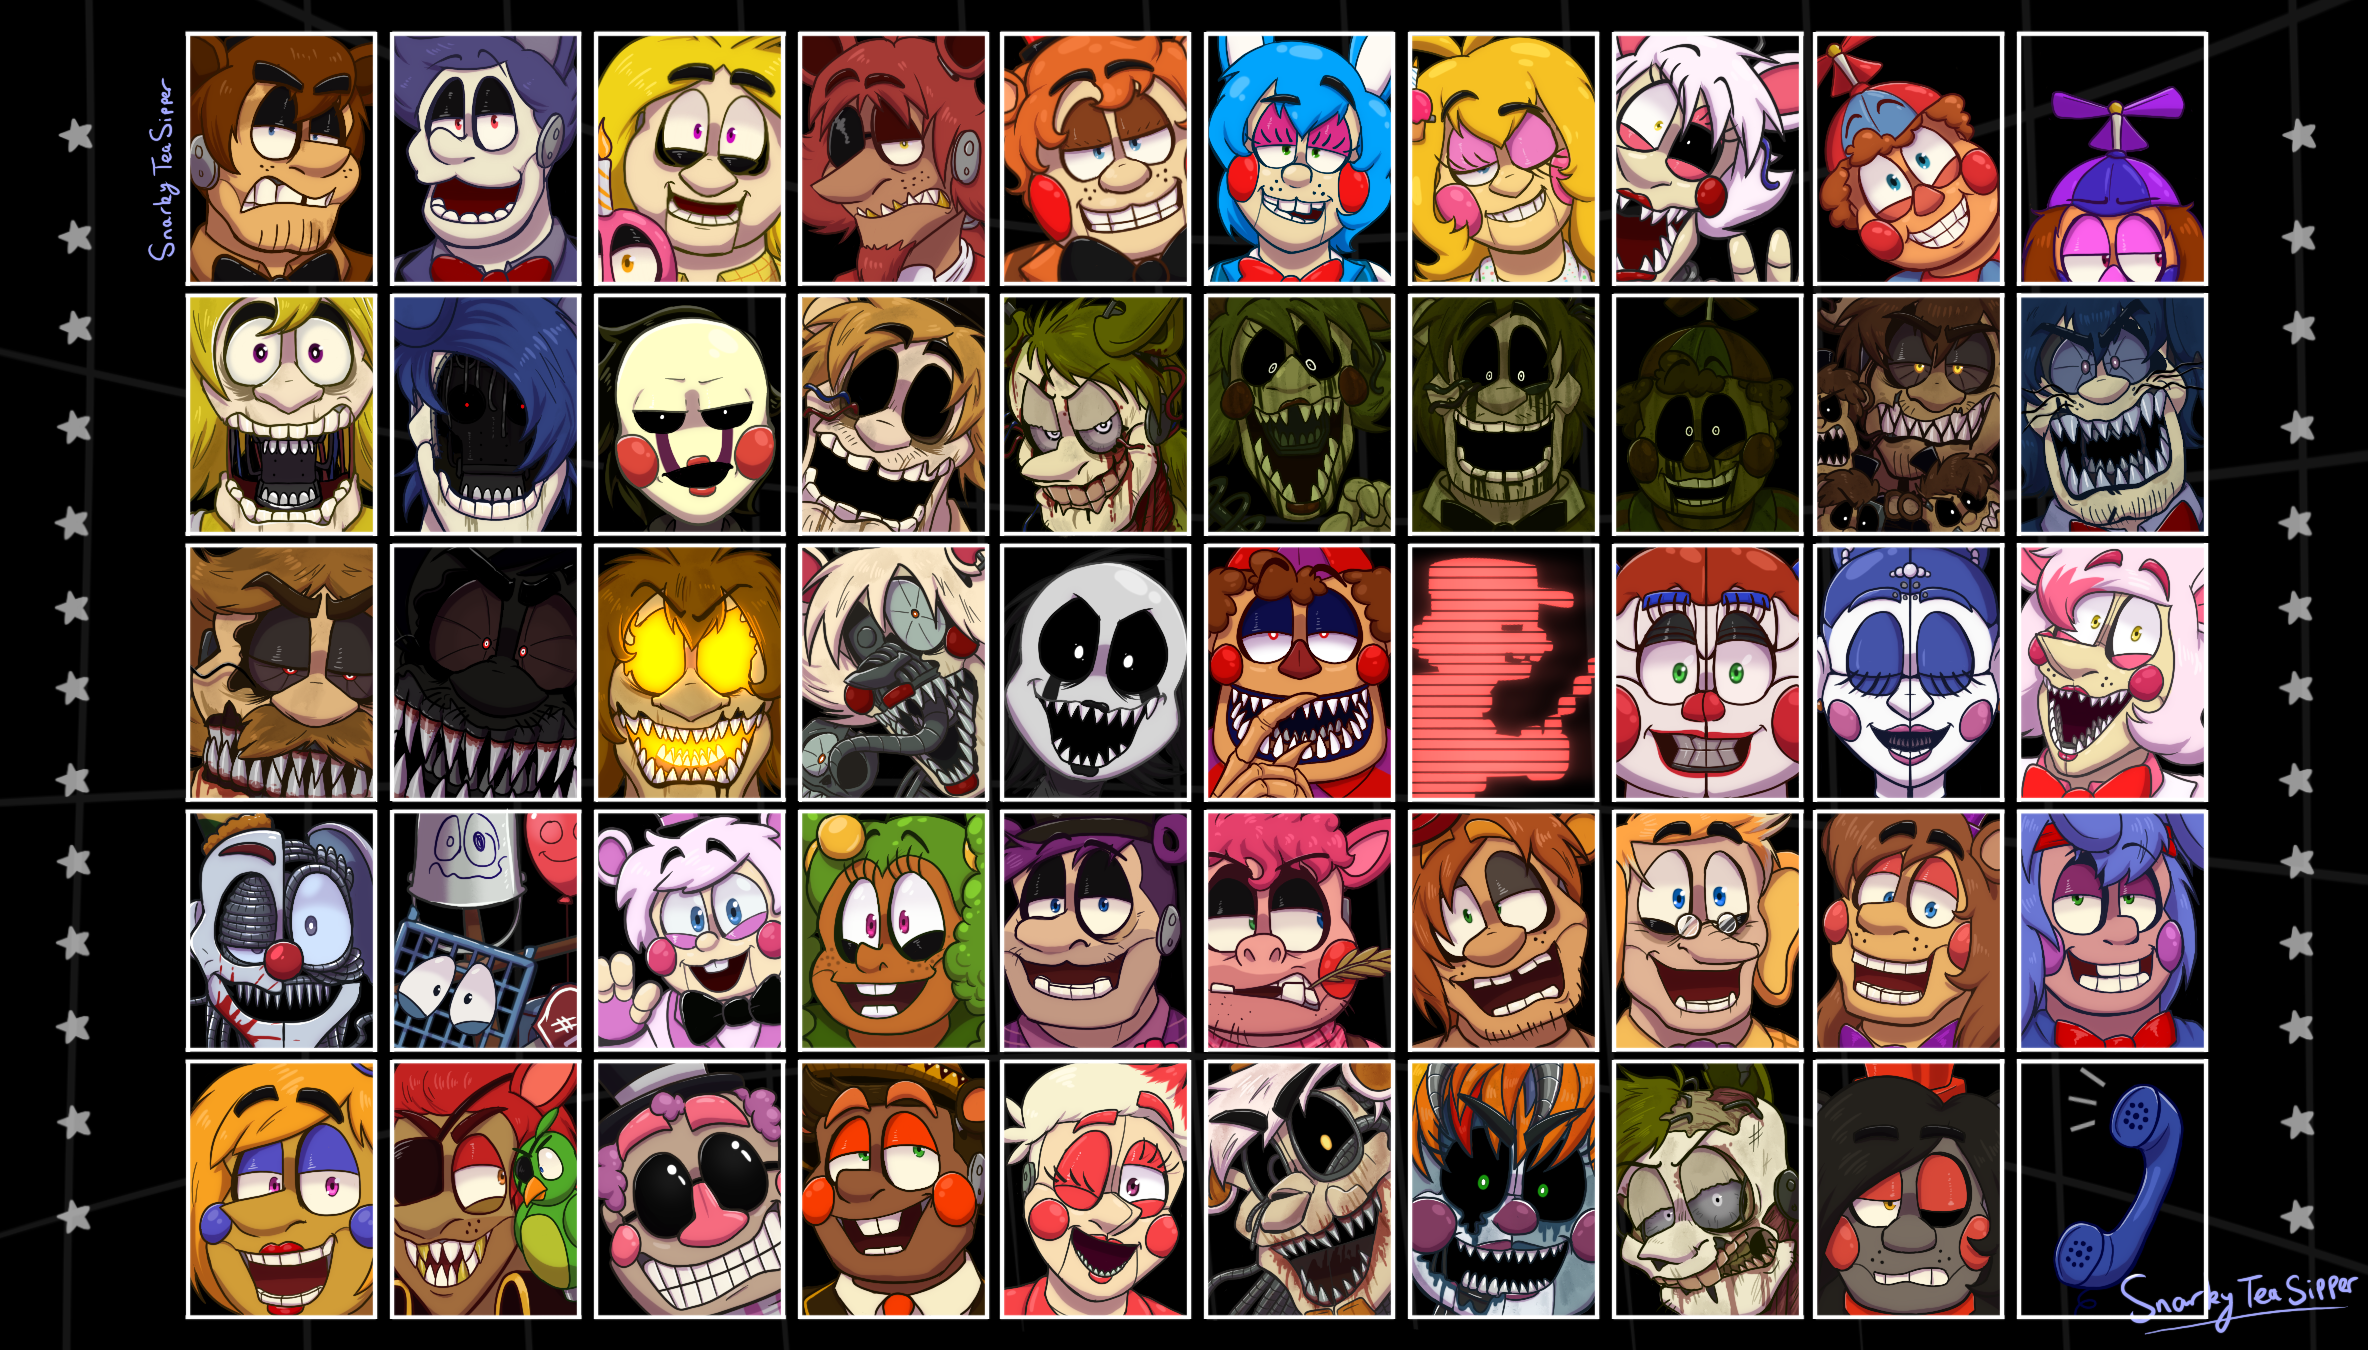 My idea for an Ultimate Custom Night re-roster. : r/fivenightsatfreddys